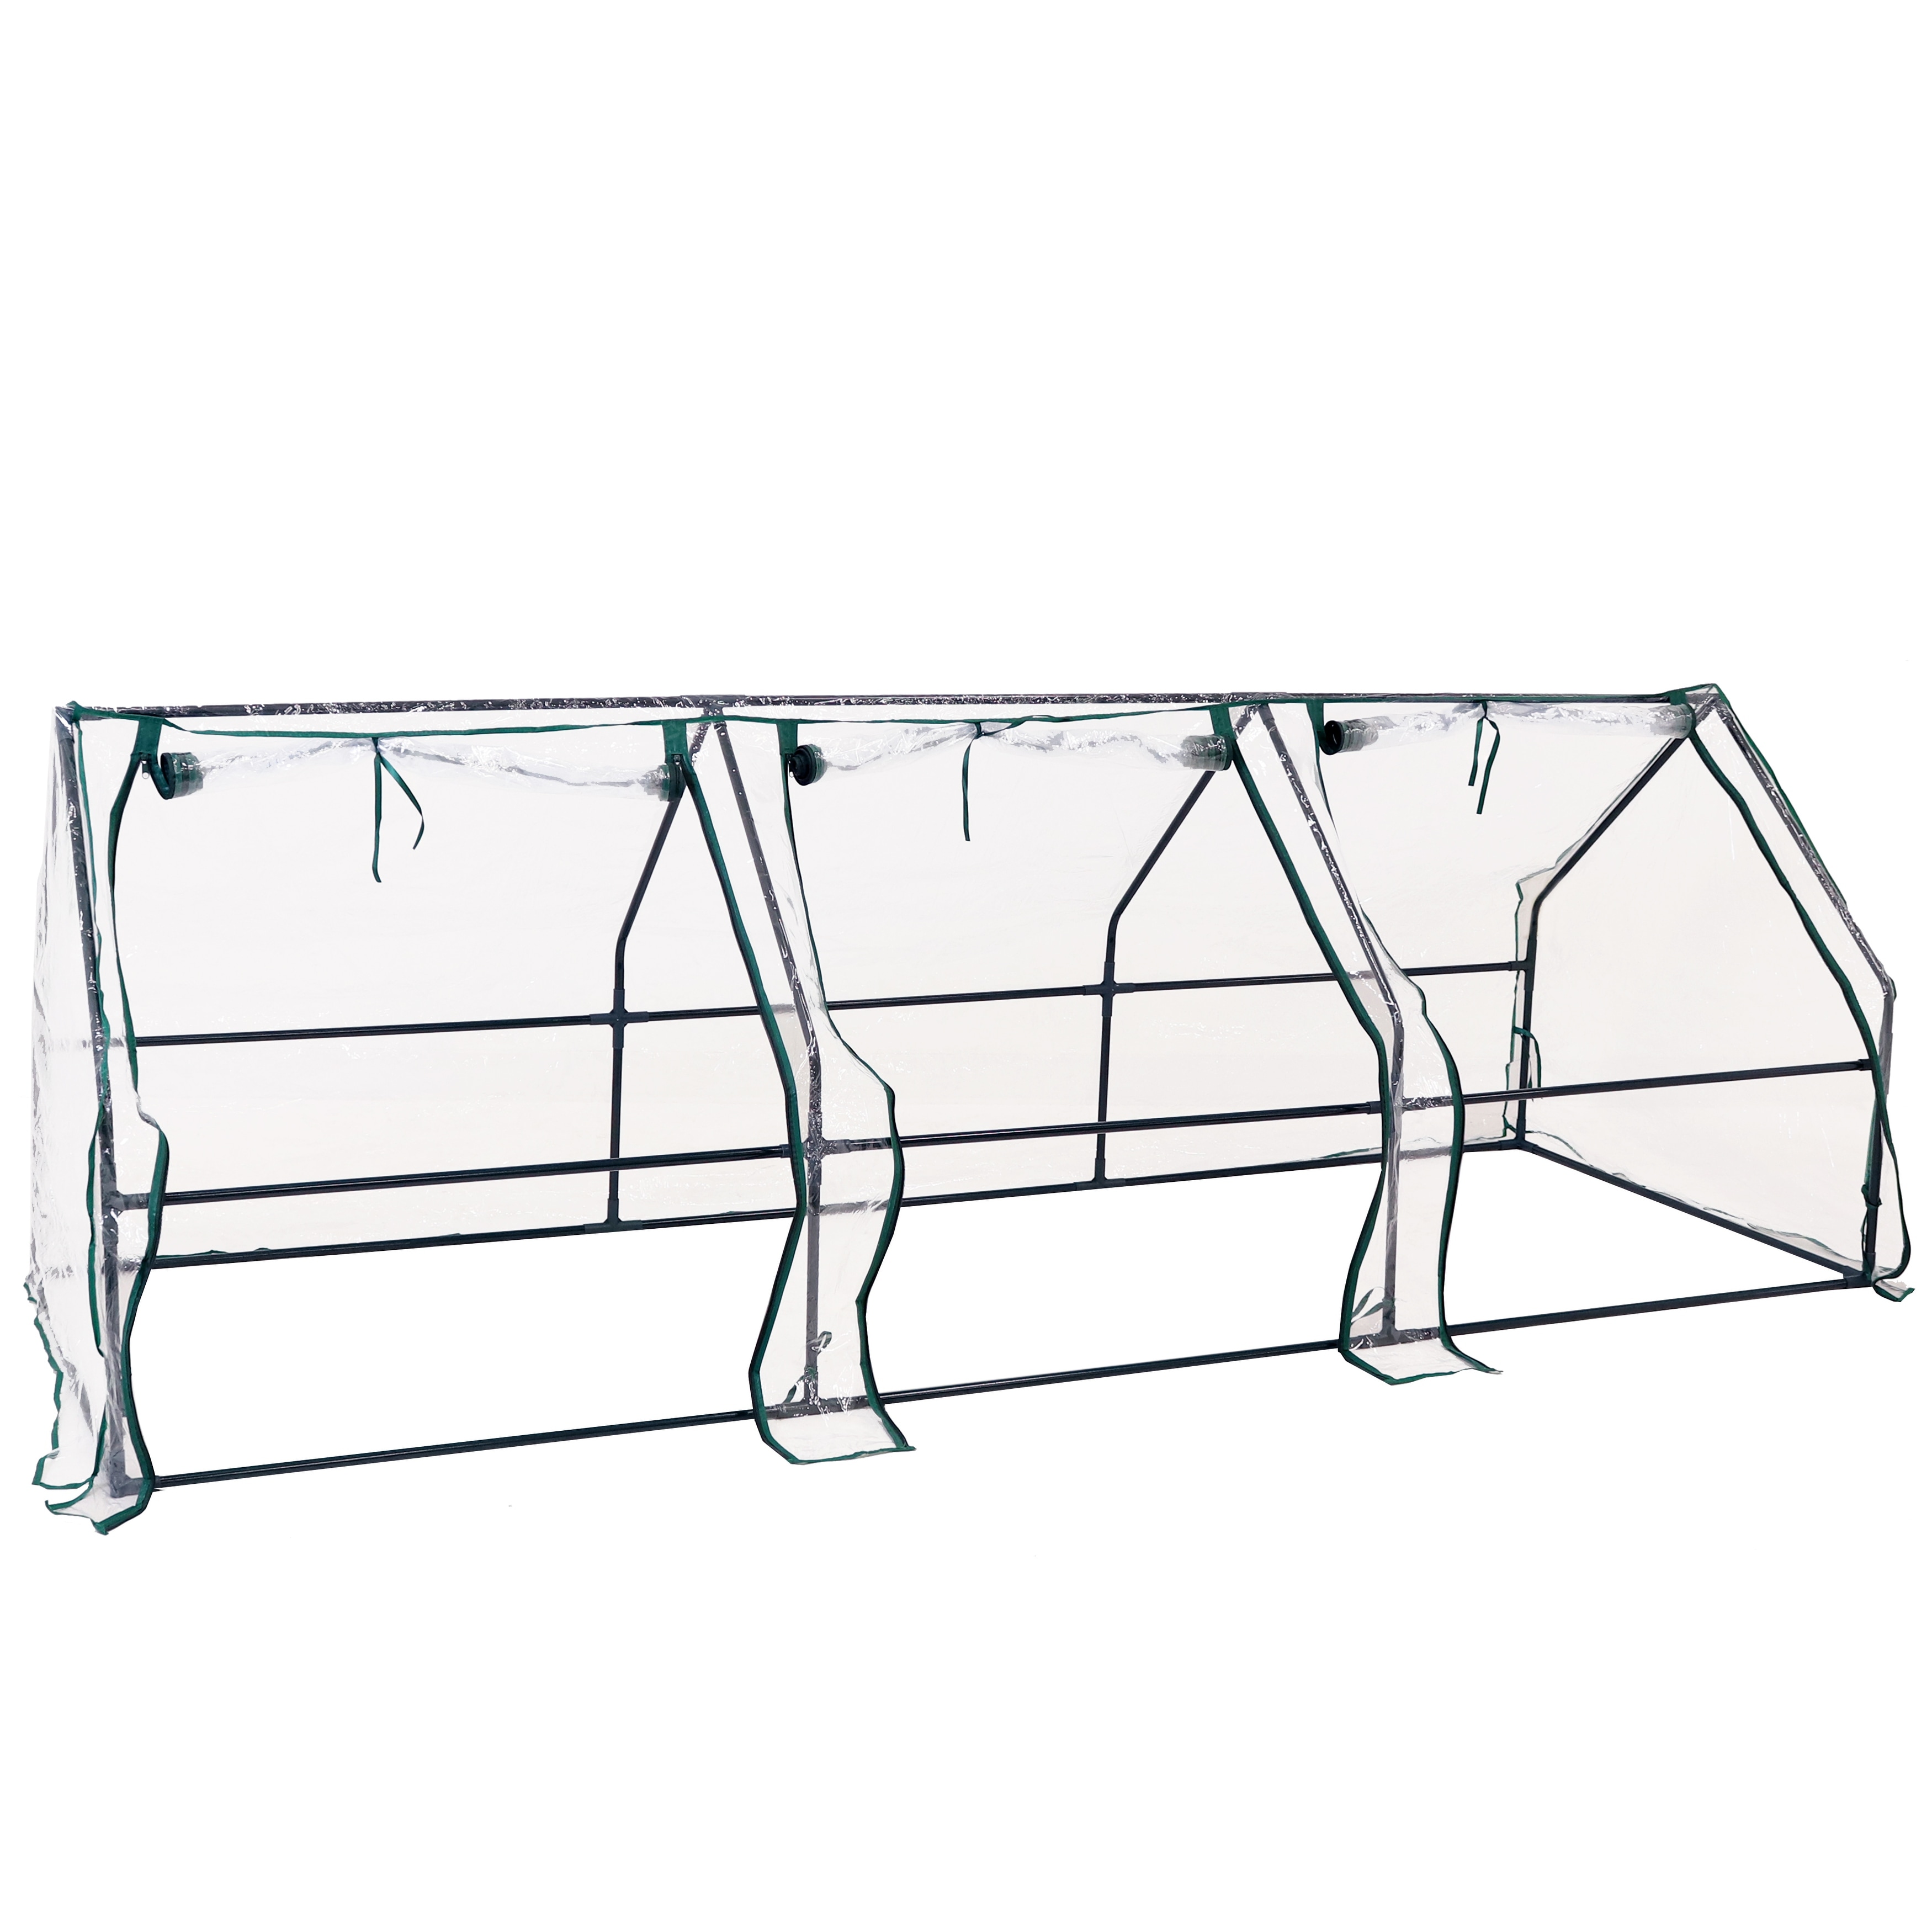 Sunnydaze Seedling Cloche Mini Greenhouse with Zippered Doors Clear Bed  Bath  Beyond 35114137